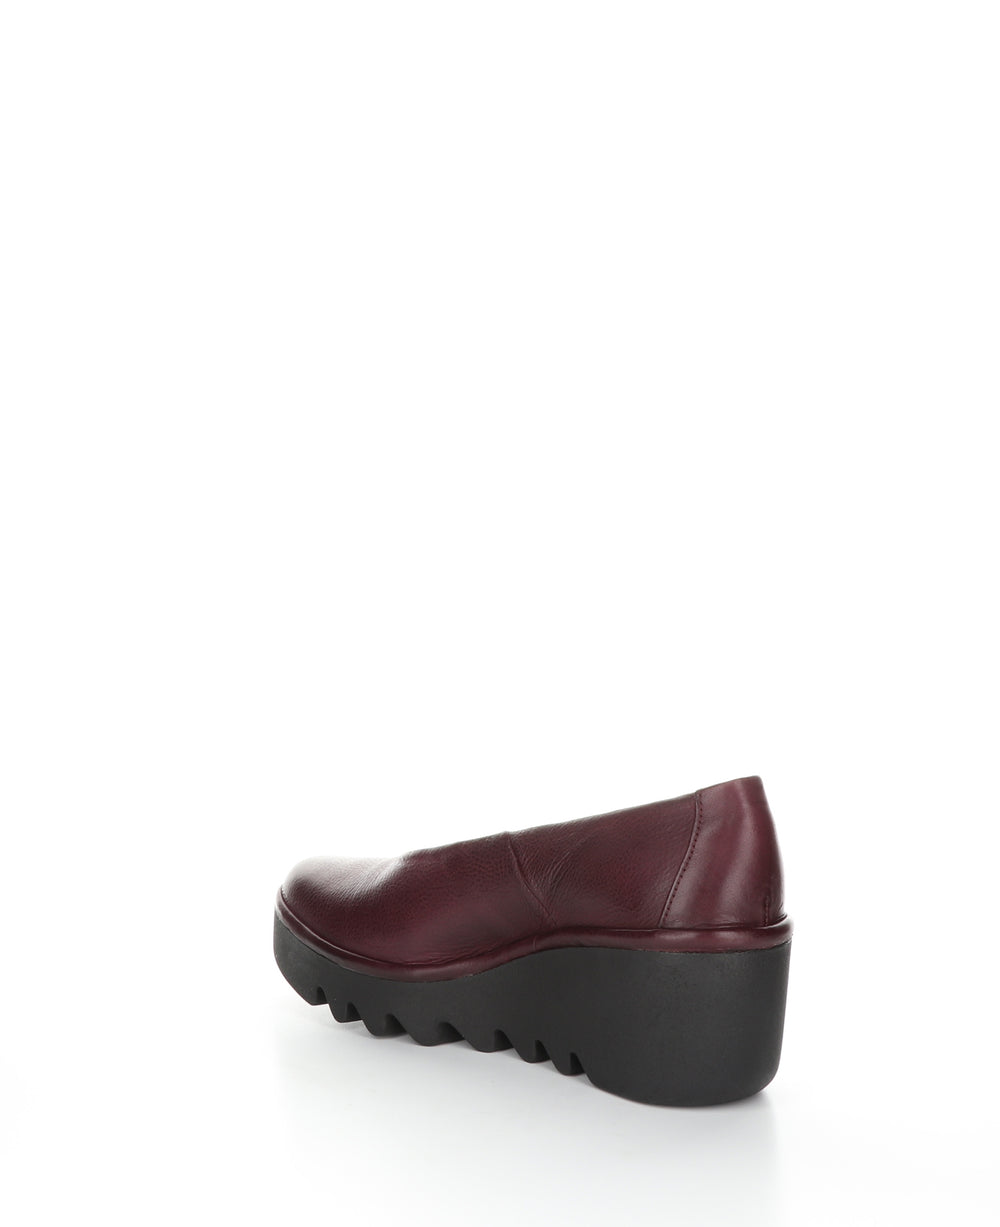 BESO246FLY Wine Round Toe Shoes